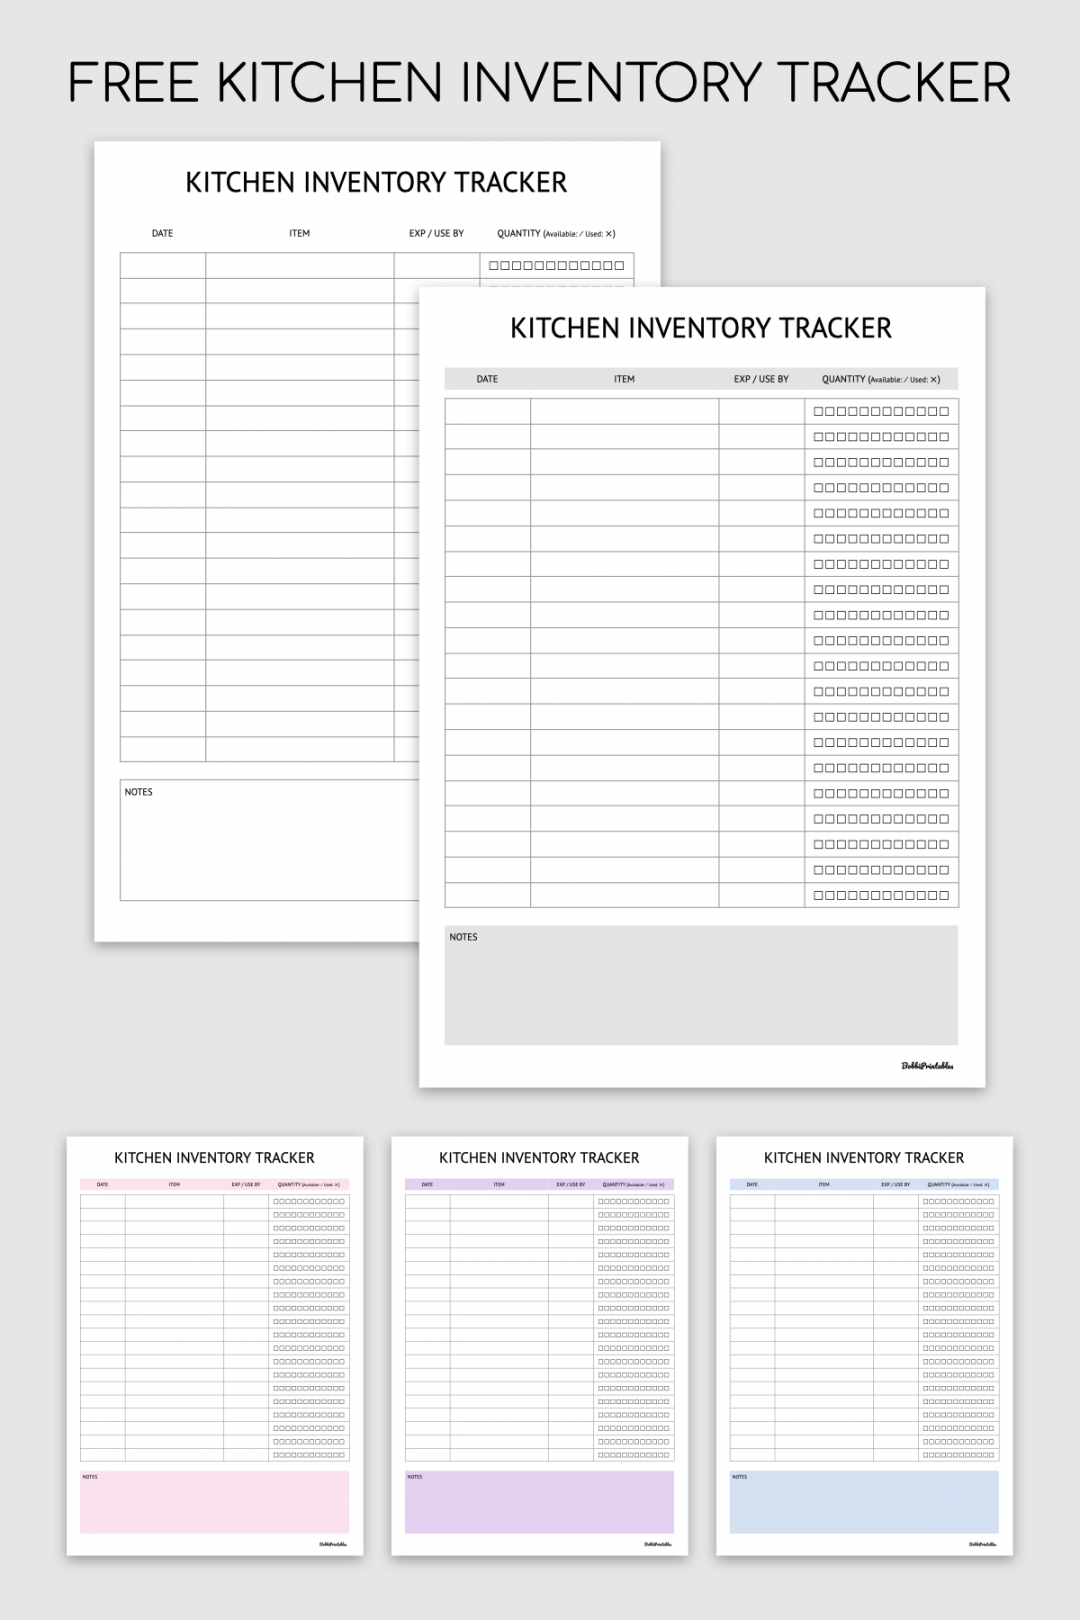 Kitchen Inventory Tracker - Free Printable Digital Template